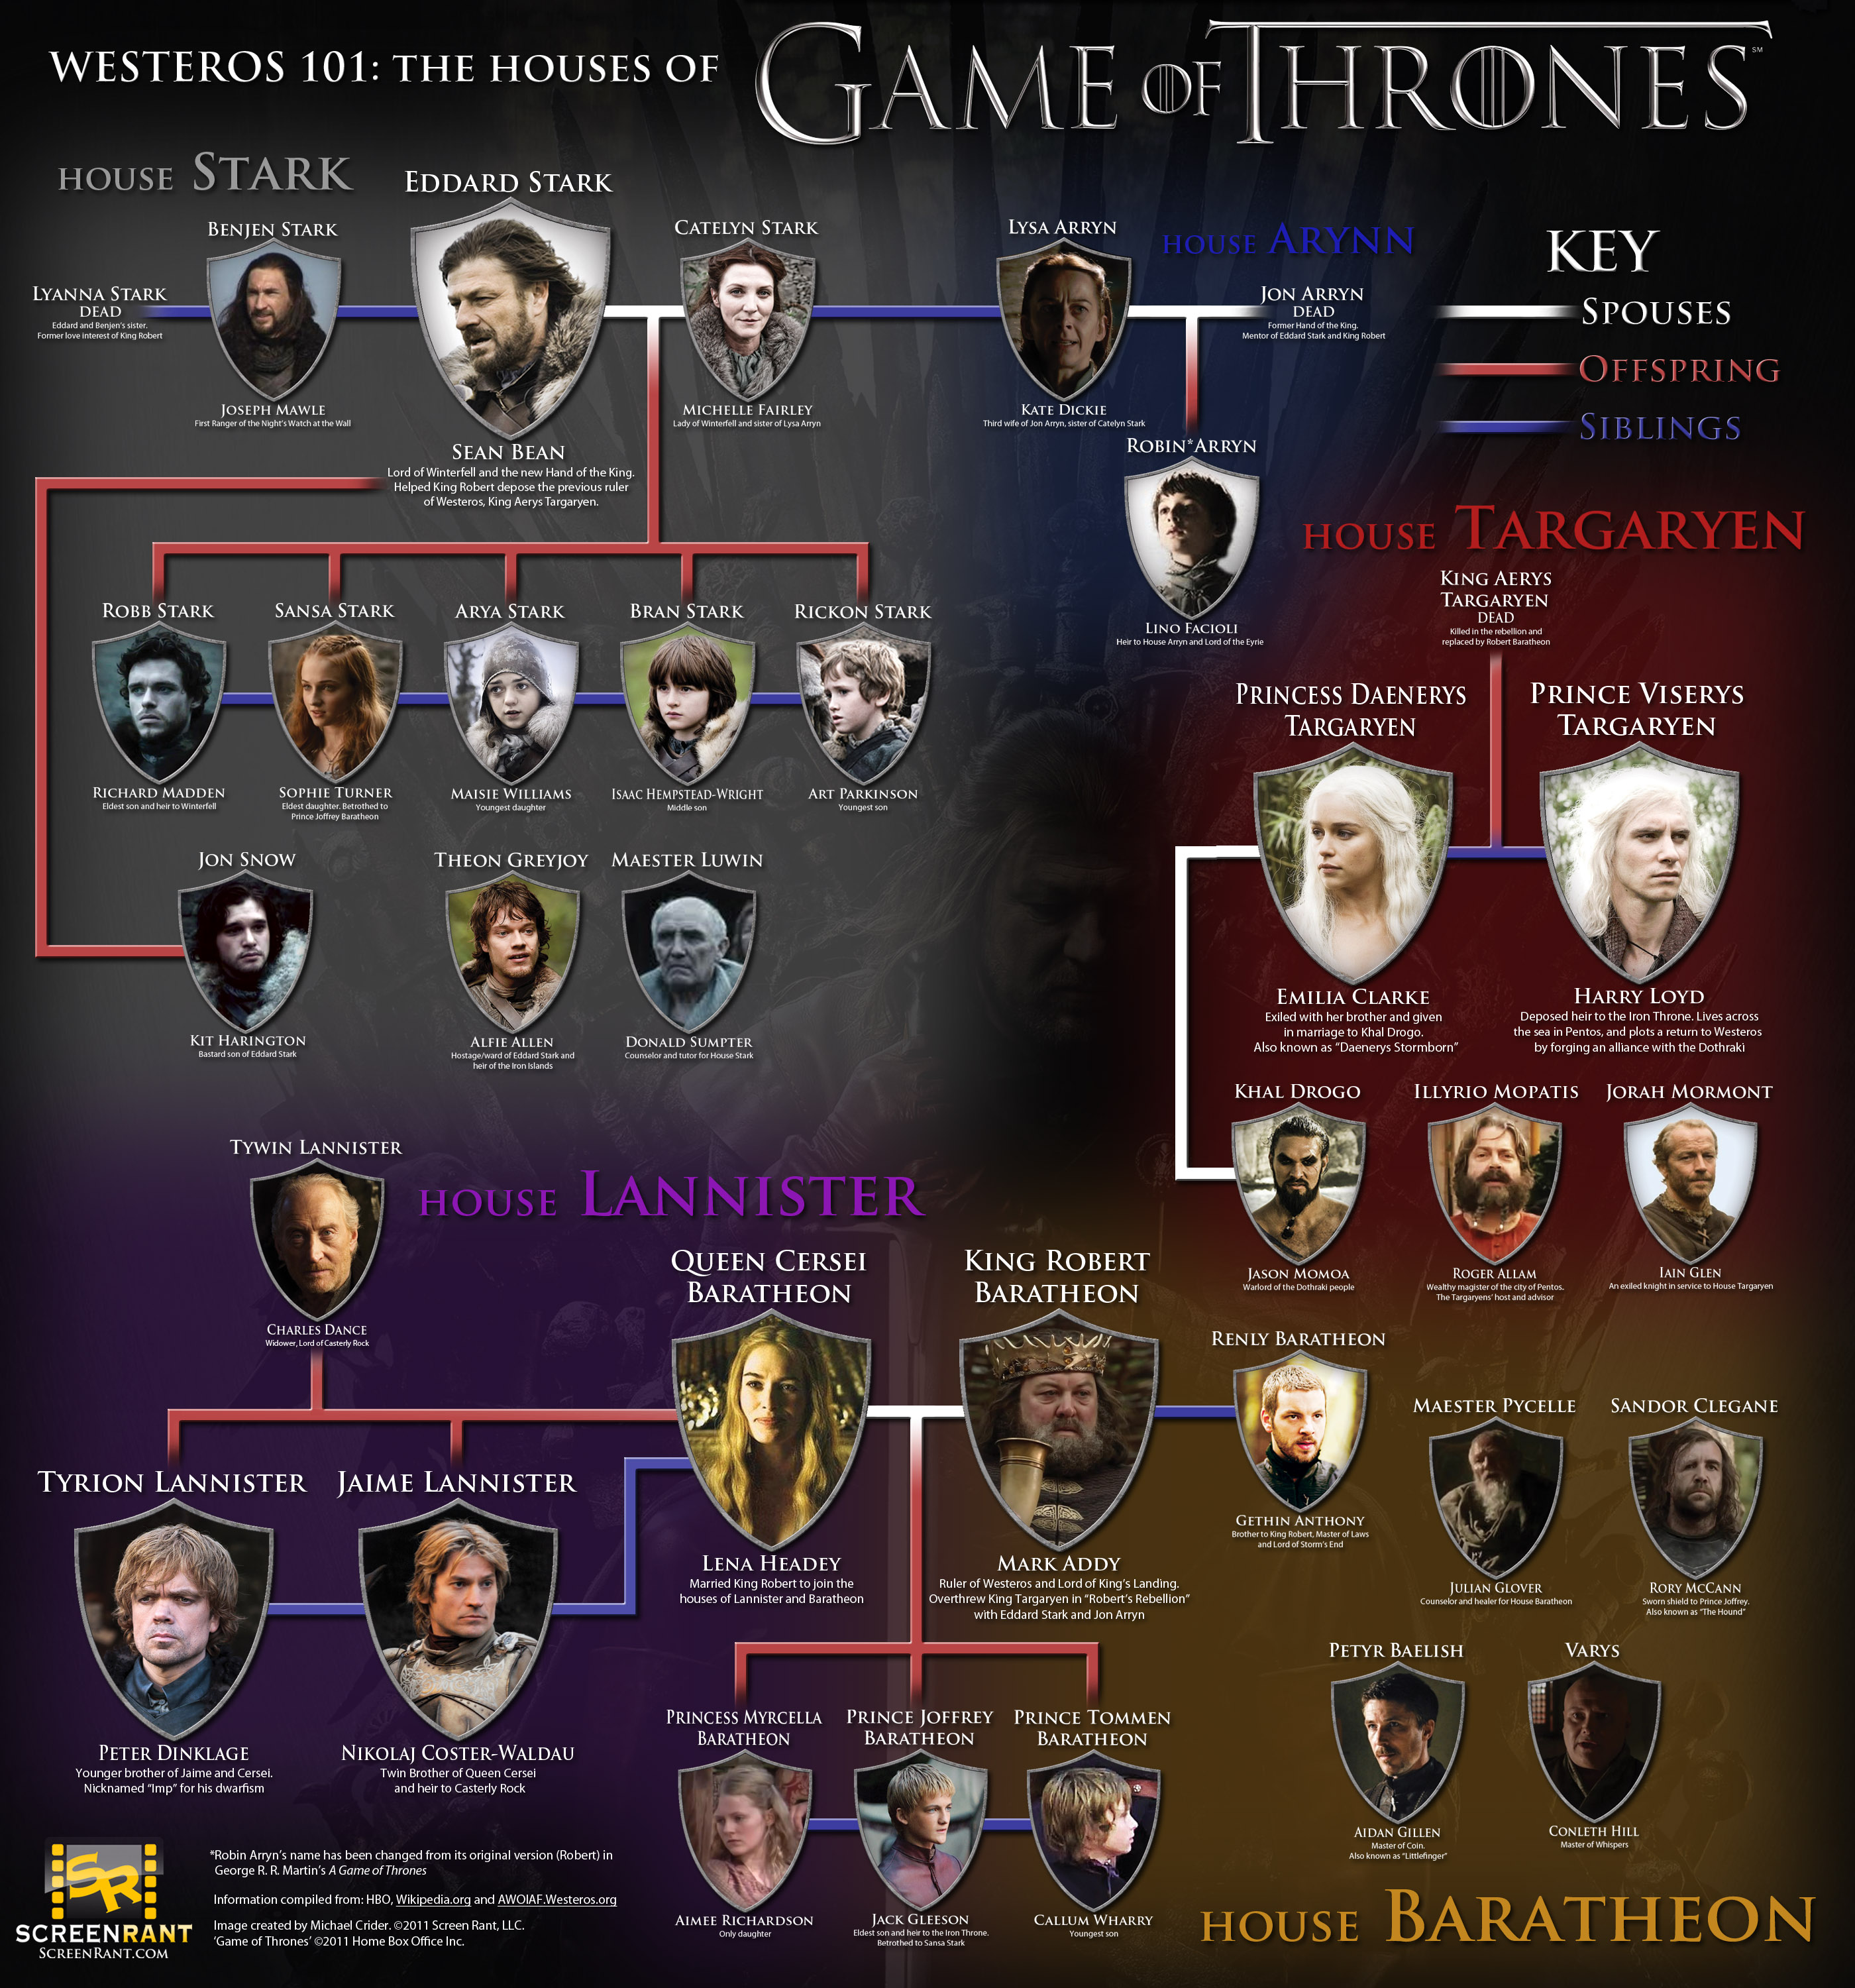 Game-of-Thrones-Houses-infographic-Westeros-101-f.jpg